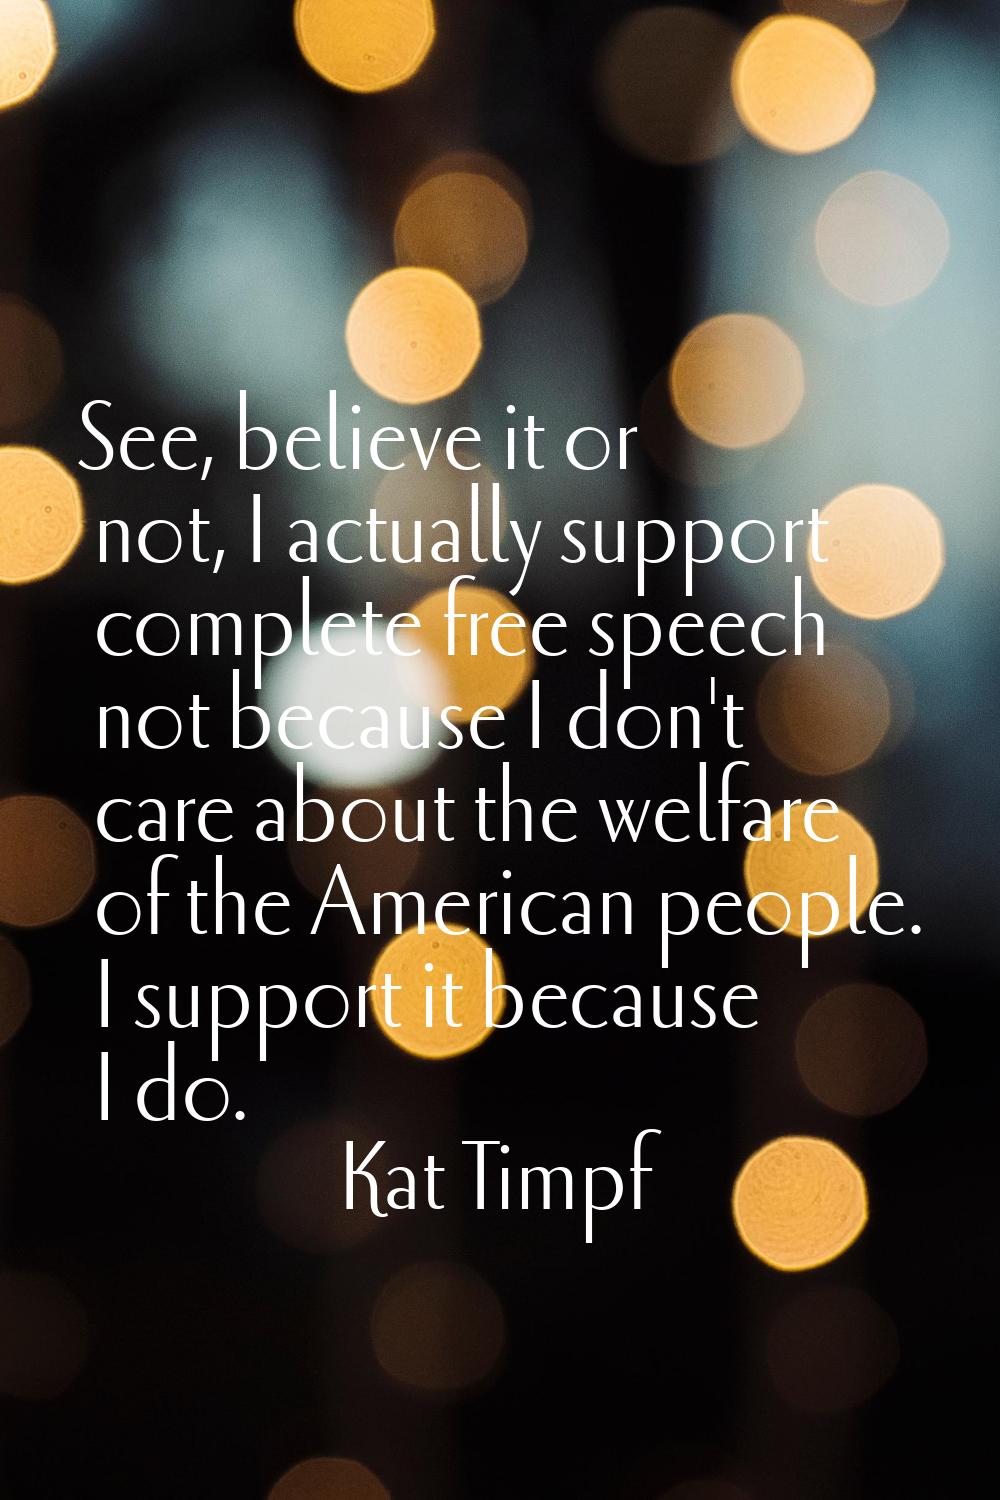 See, believe it or not, I actually support complete free speech not because I don't care about the 